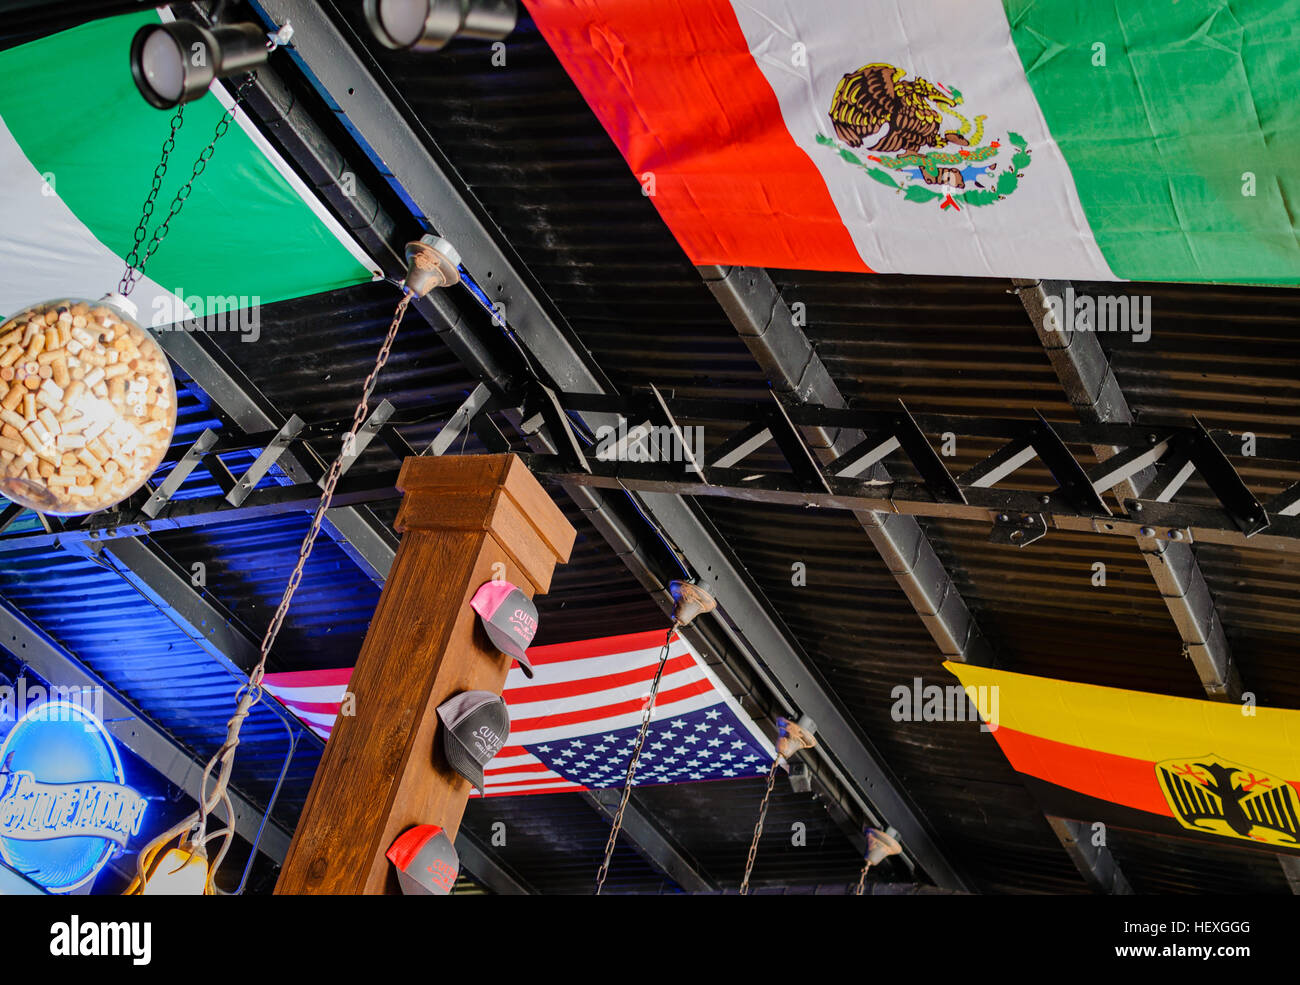 Mexican, German, and American flags displayed on the ceiling of the Culture's Grill cafe, Fredericksburg, Texas, USA Stock Photo